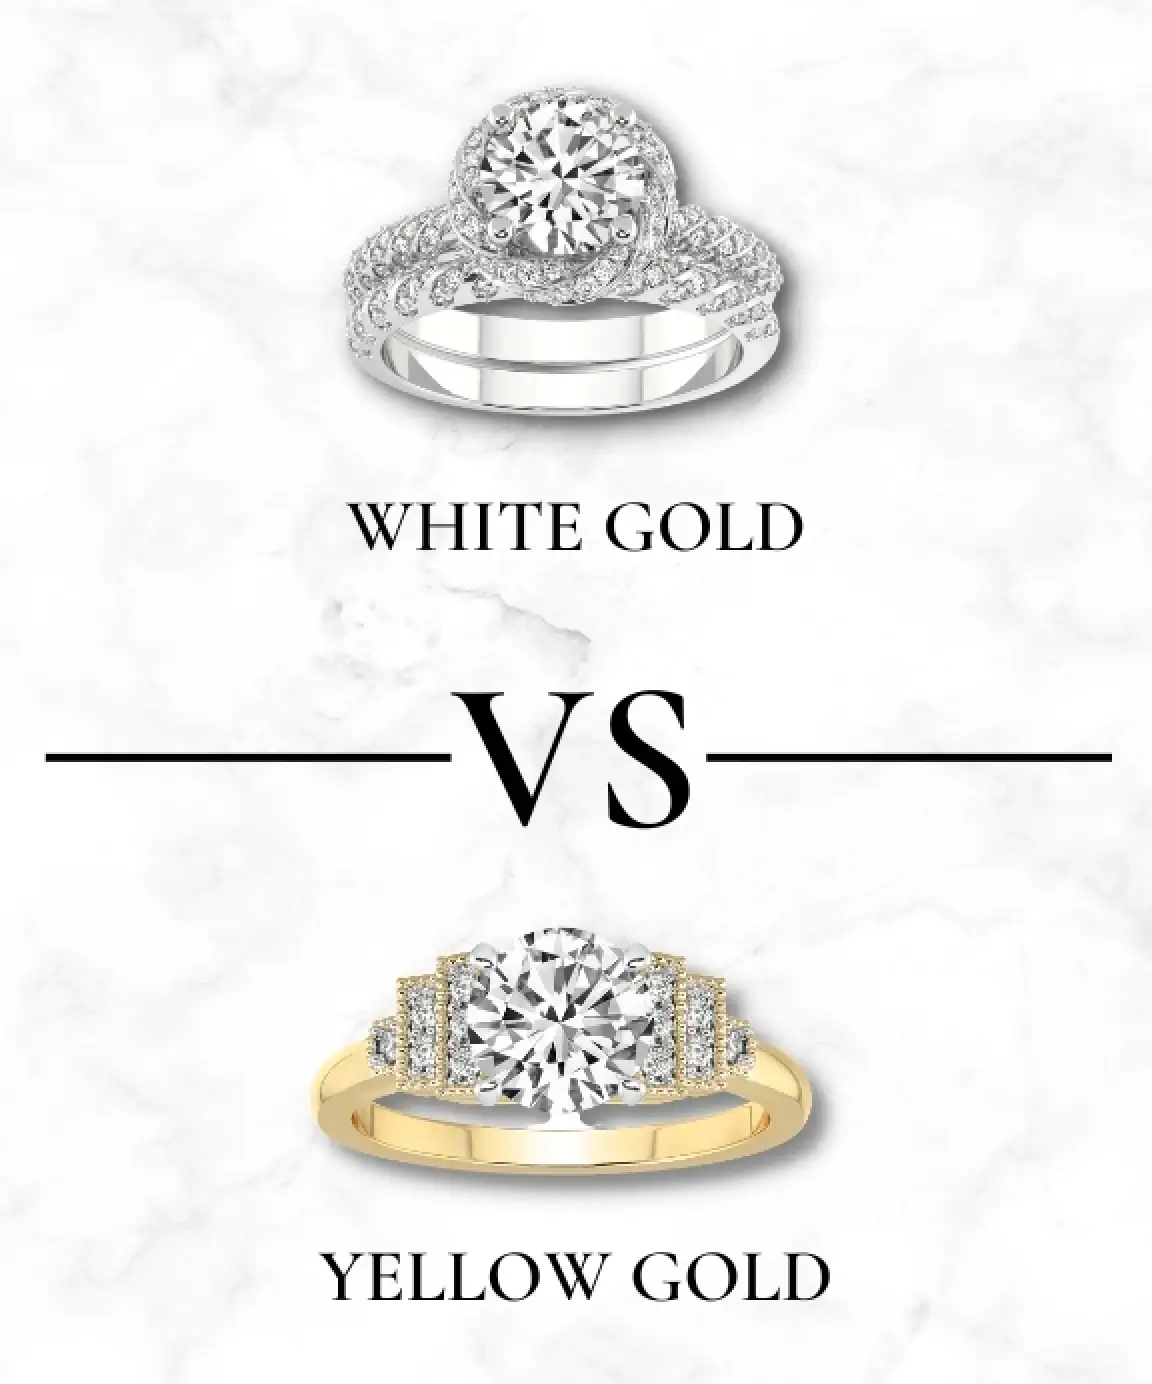 White Gold Vs Yellow Gold: Which is More Expensive?